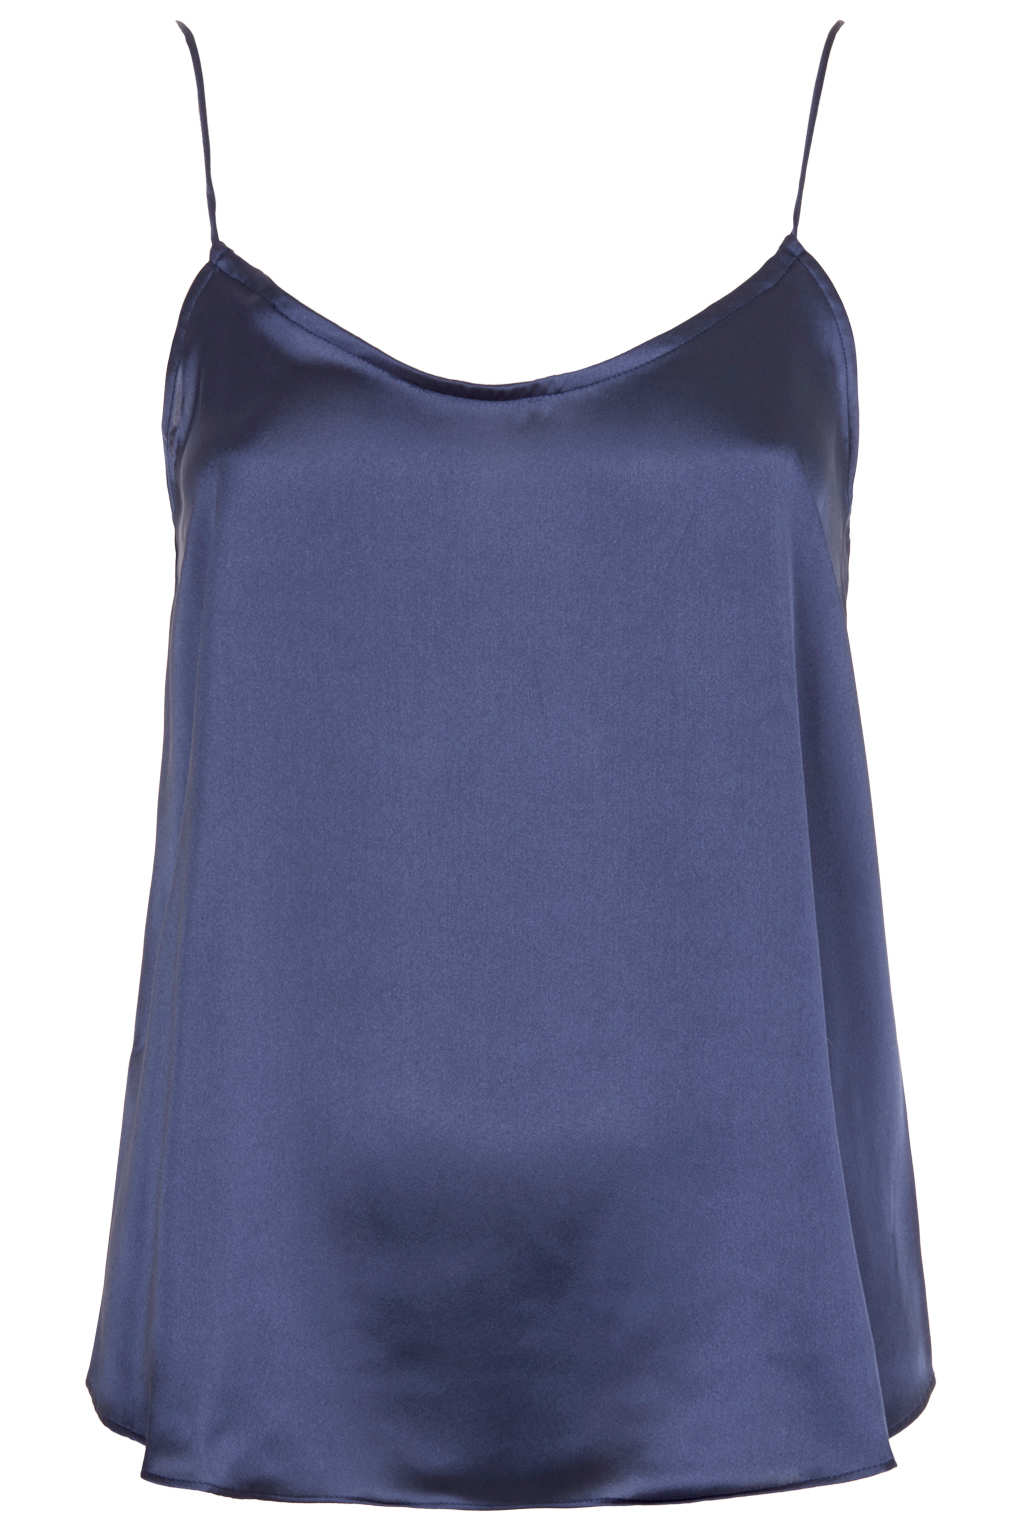 Lyst Topshop Satin Cami In Blue